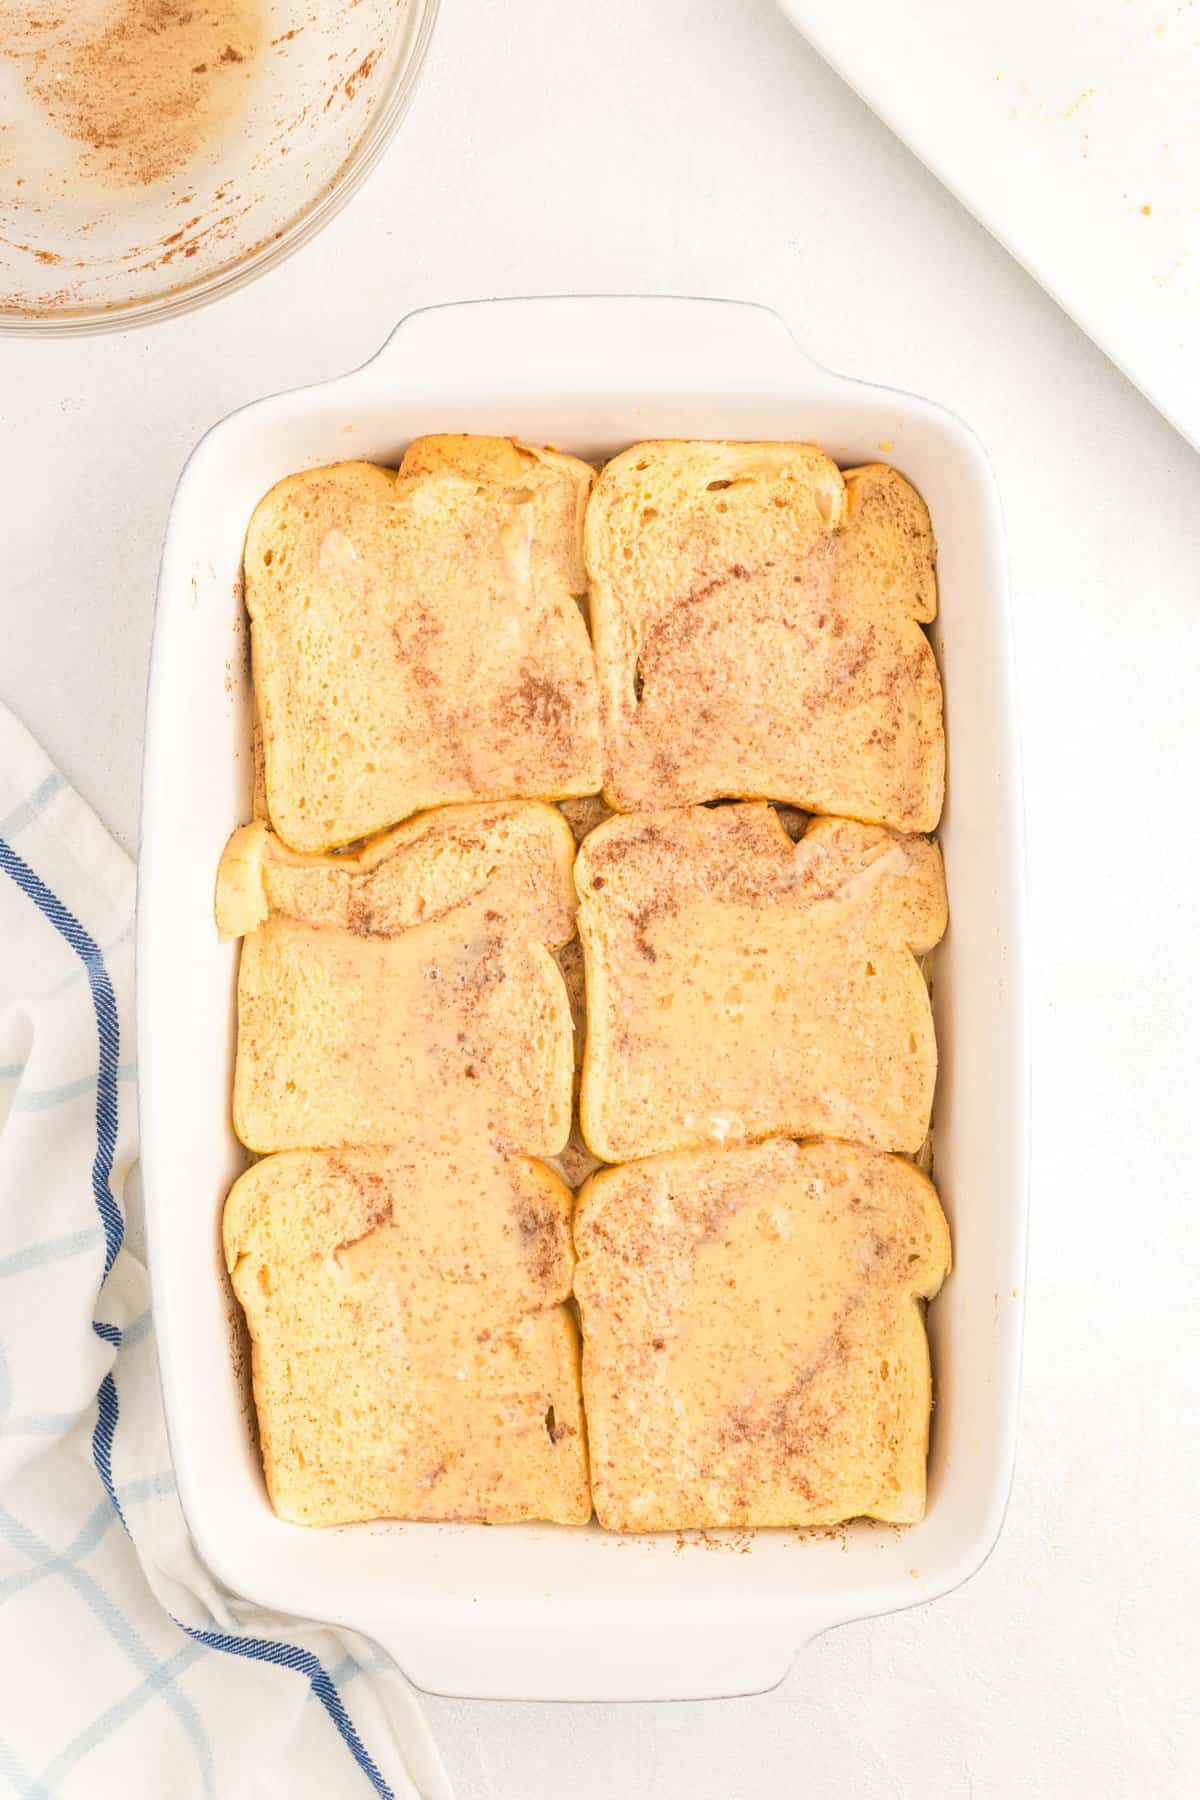 Covering the bread slices with egg wash for French Toast Casserole recipe